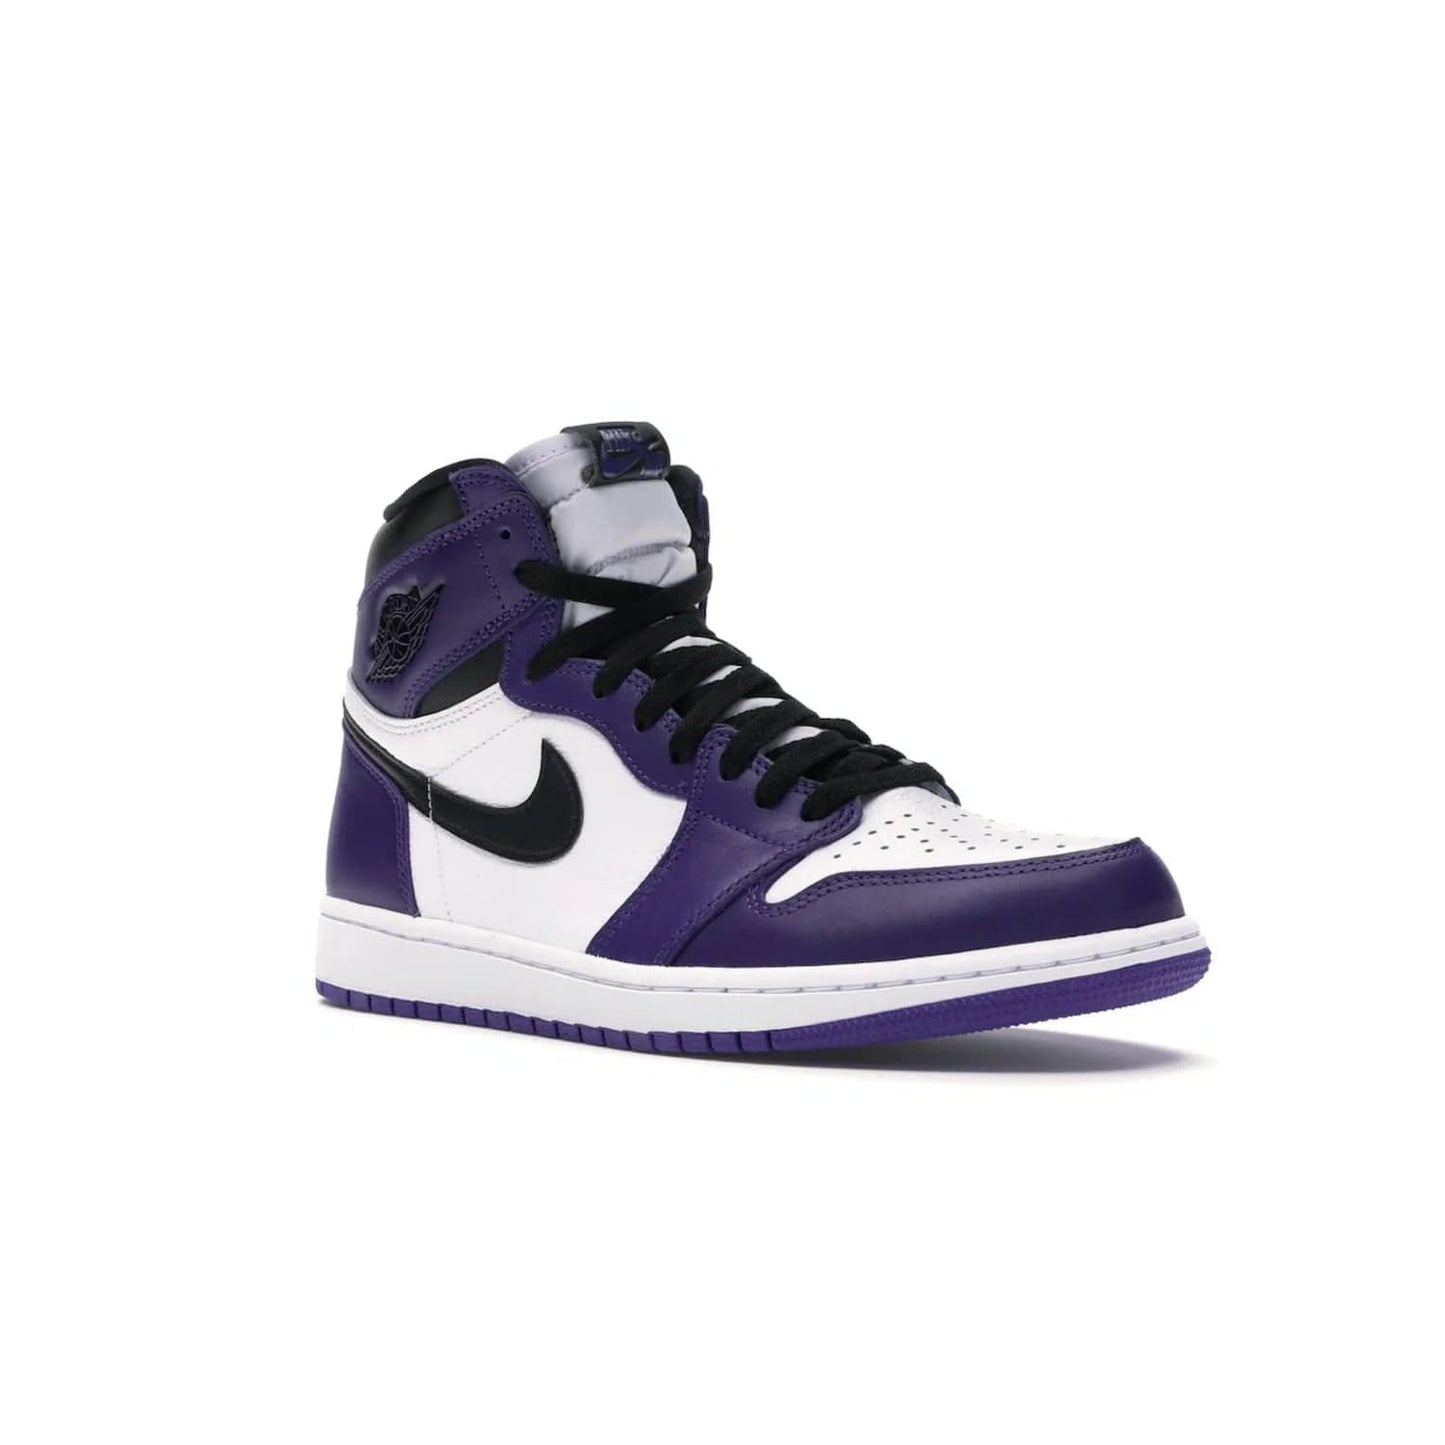 Jordan 1 Retro High Court Purple White - Image 5 - Only at www.BallersClubKickz.com - Grab the classic Jordan 1 Retro High Court Purple White and add major flavor to your collection. White leather upper with Court Purple overlays and Swoosh logo. White midsole and purple outsole. Get yours and rep your Jordan Brand.